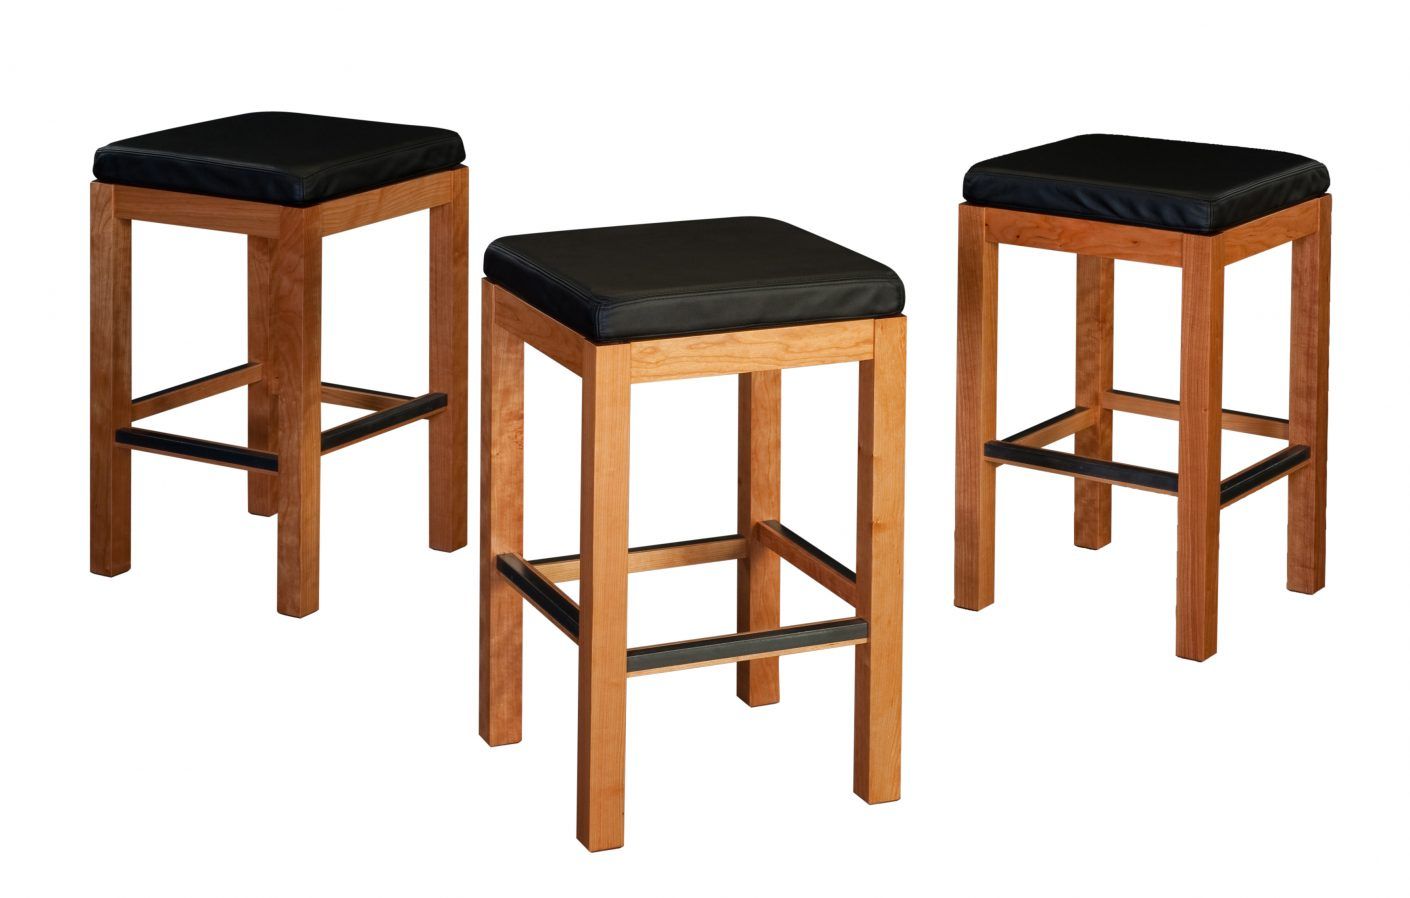 Colby Stools. Shown in cherry with black leather.